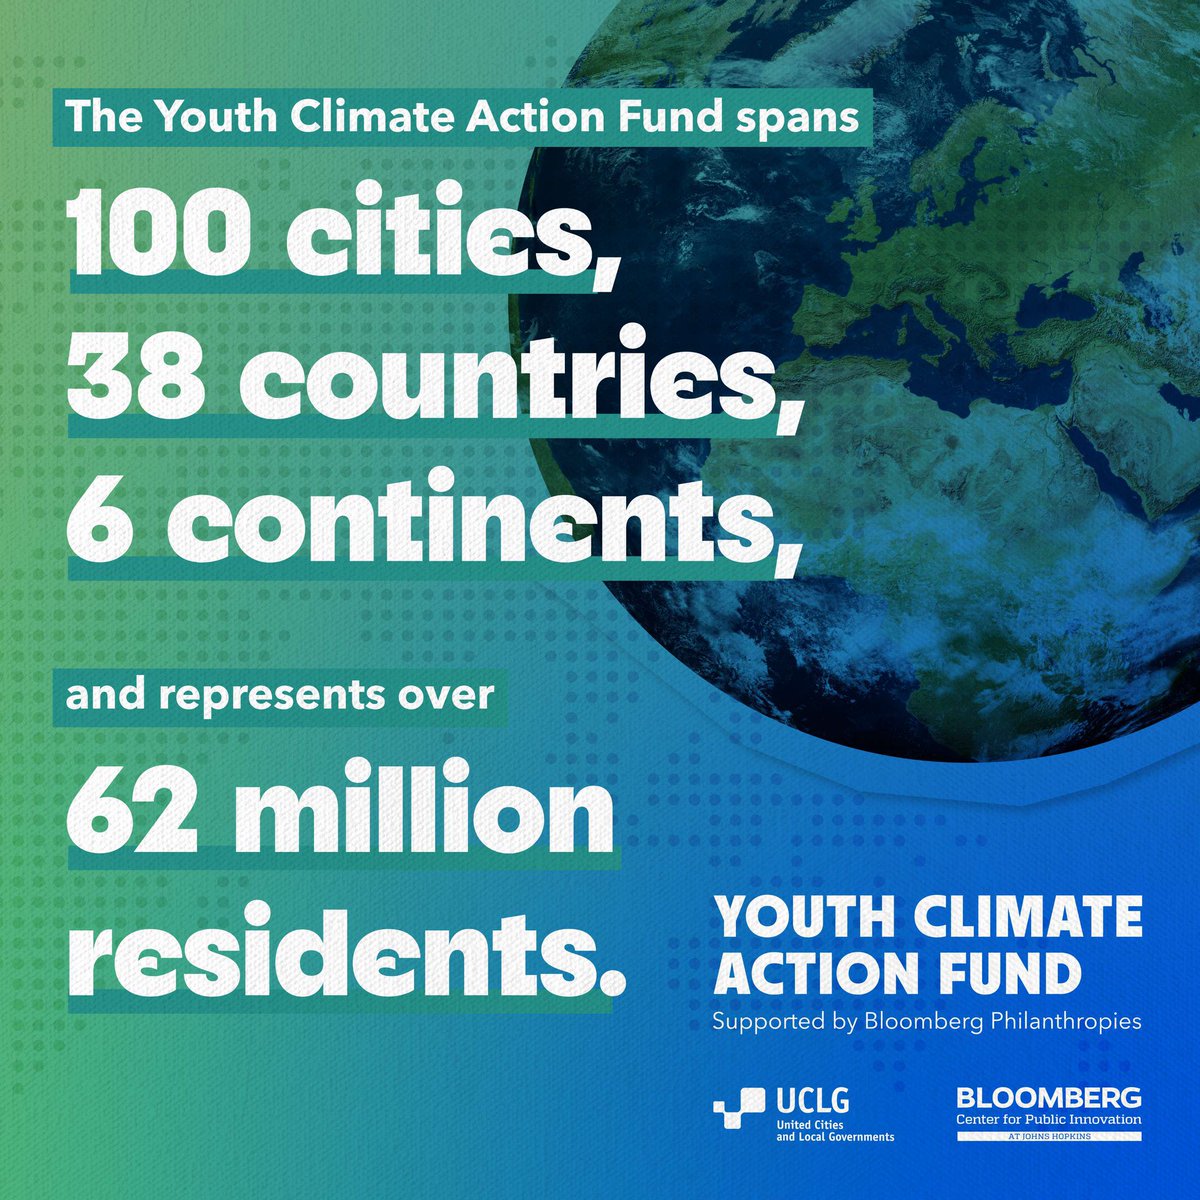 💫Youth-led awareness, education, research, and development initiatives, 💫Youth-driven climate mitigation and adaptation projects 💫Co-governed youth climate action plans. The Youth Climate Action Fund @BloombergDotOrg delivered by @uclg_org empowers action in 💯 cities 🗺️